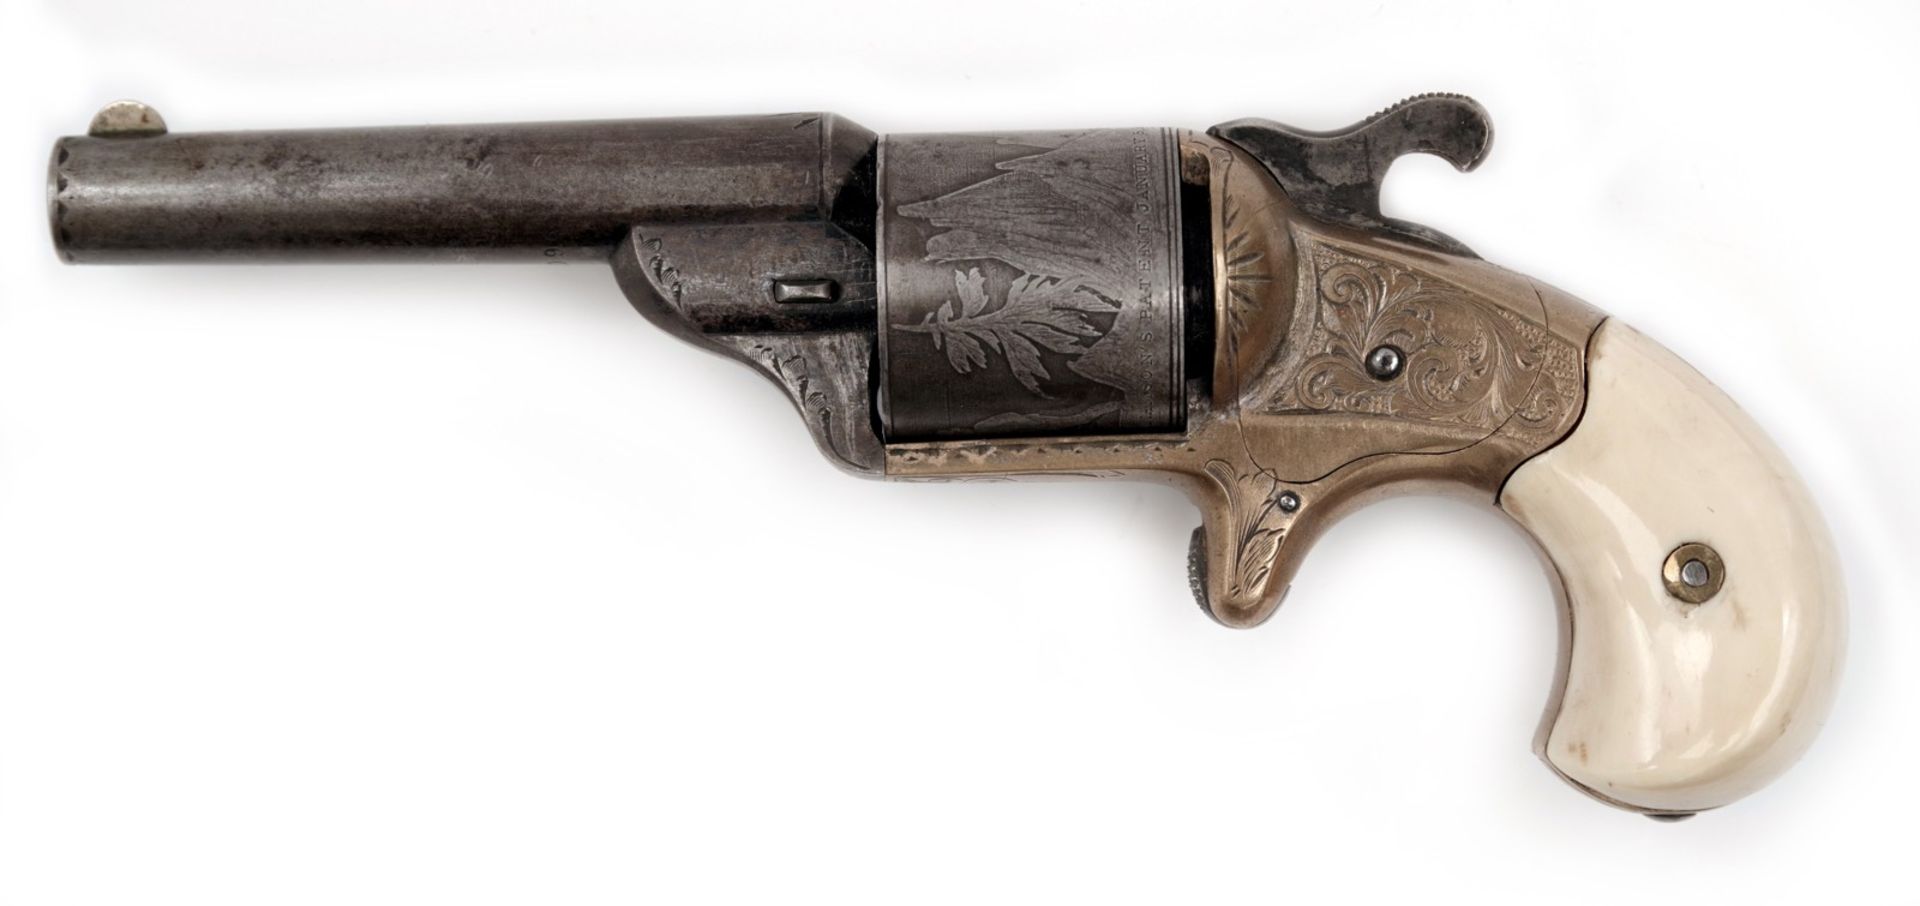 A Cased Moores Patent Firearms Co Teatfire Front Loading Revolver - Image 3 of 7